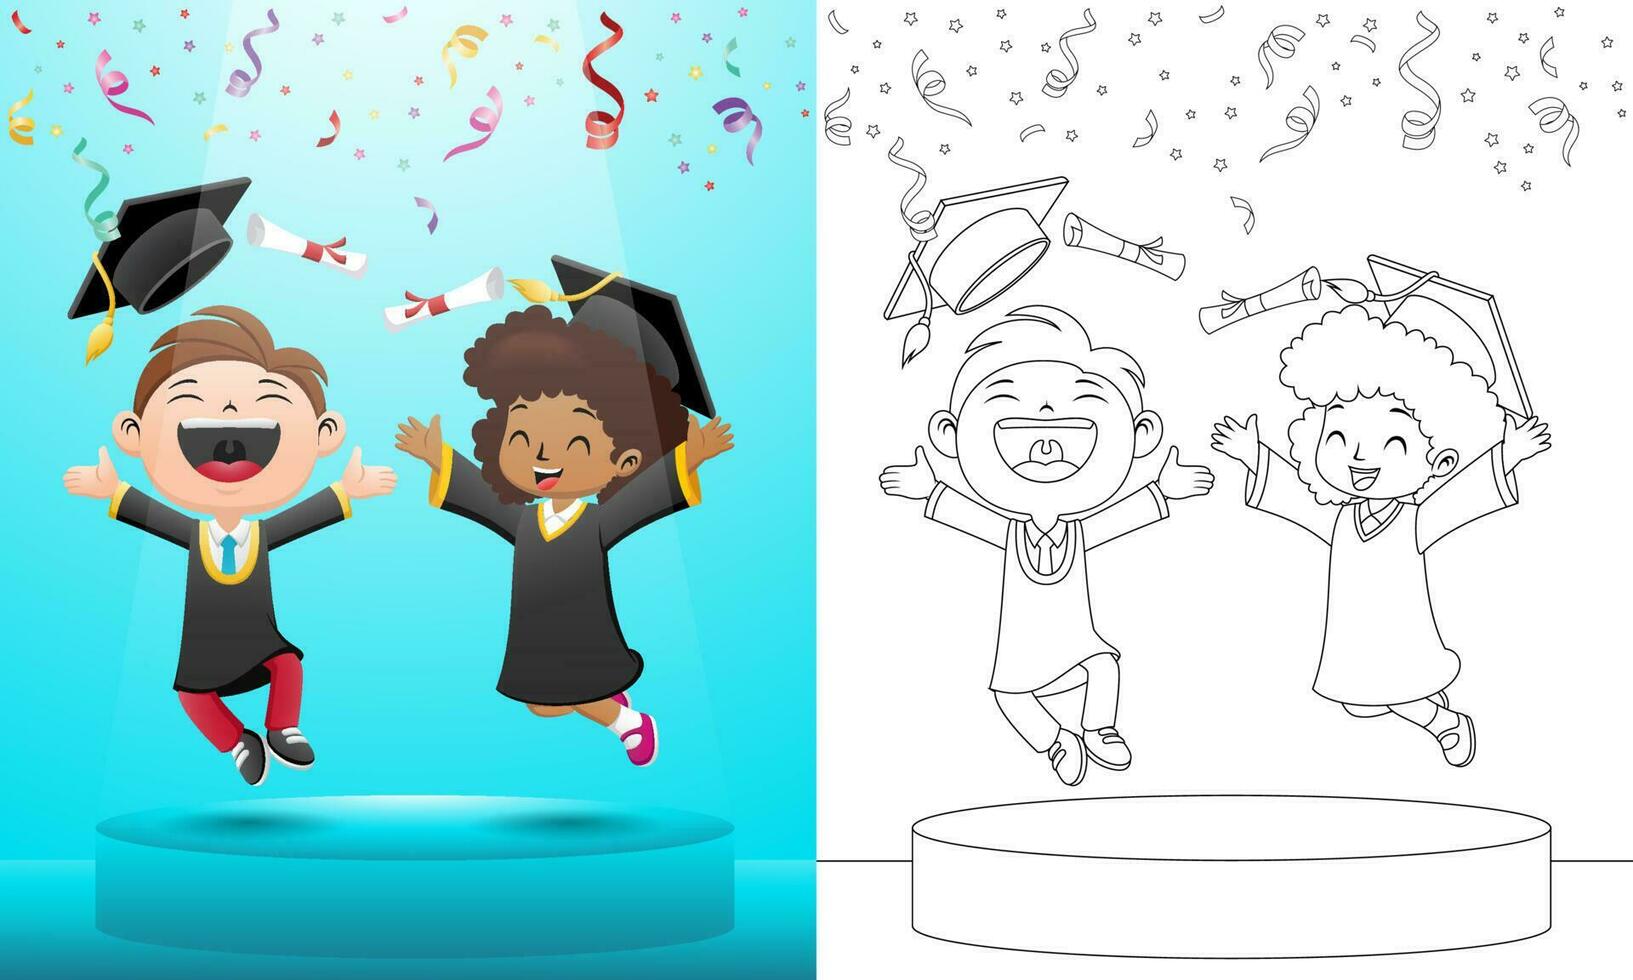 vector illustration of two happy kids in graduation gown jumping in graduation day on stage